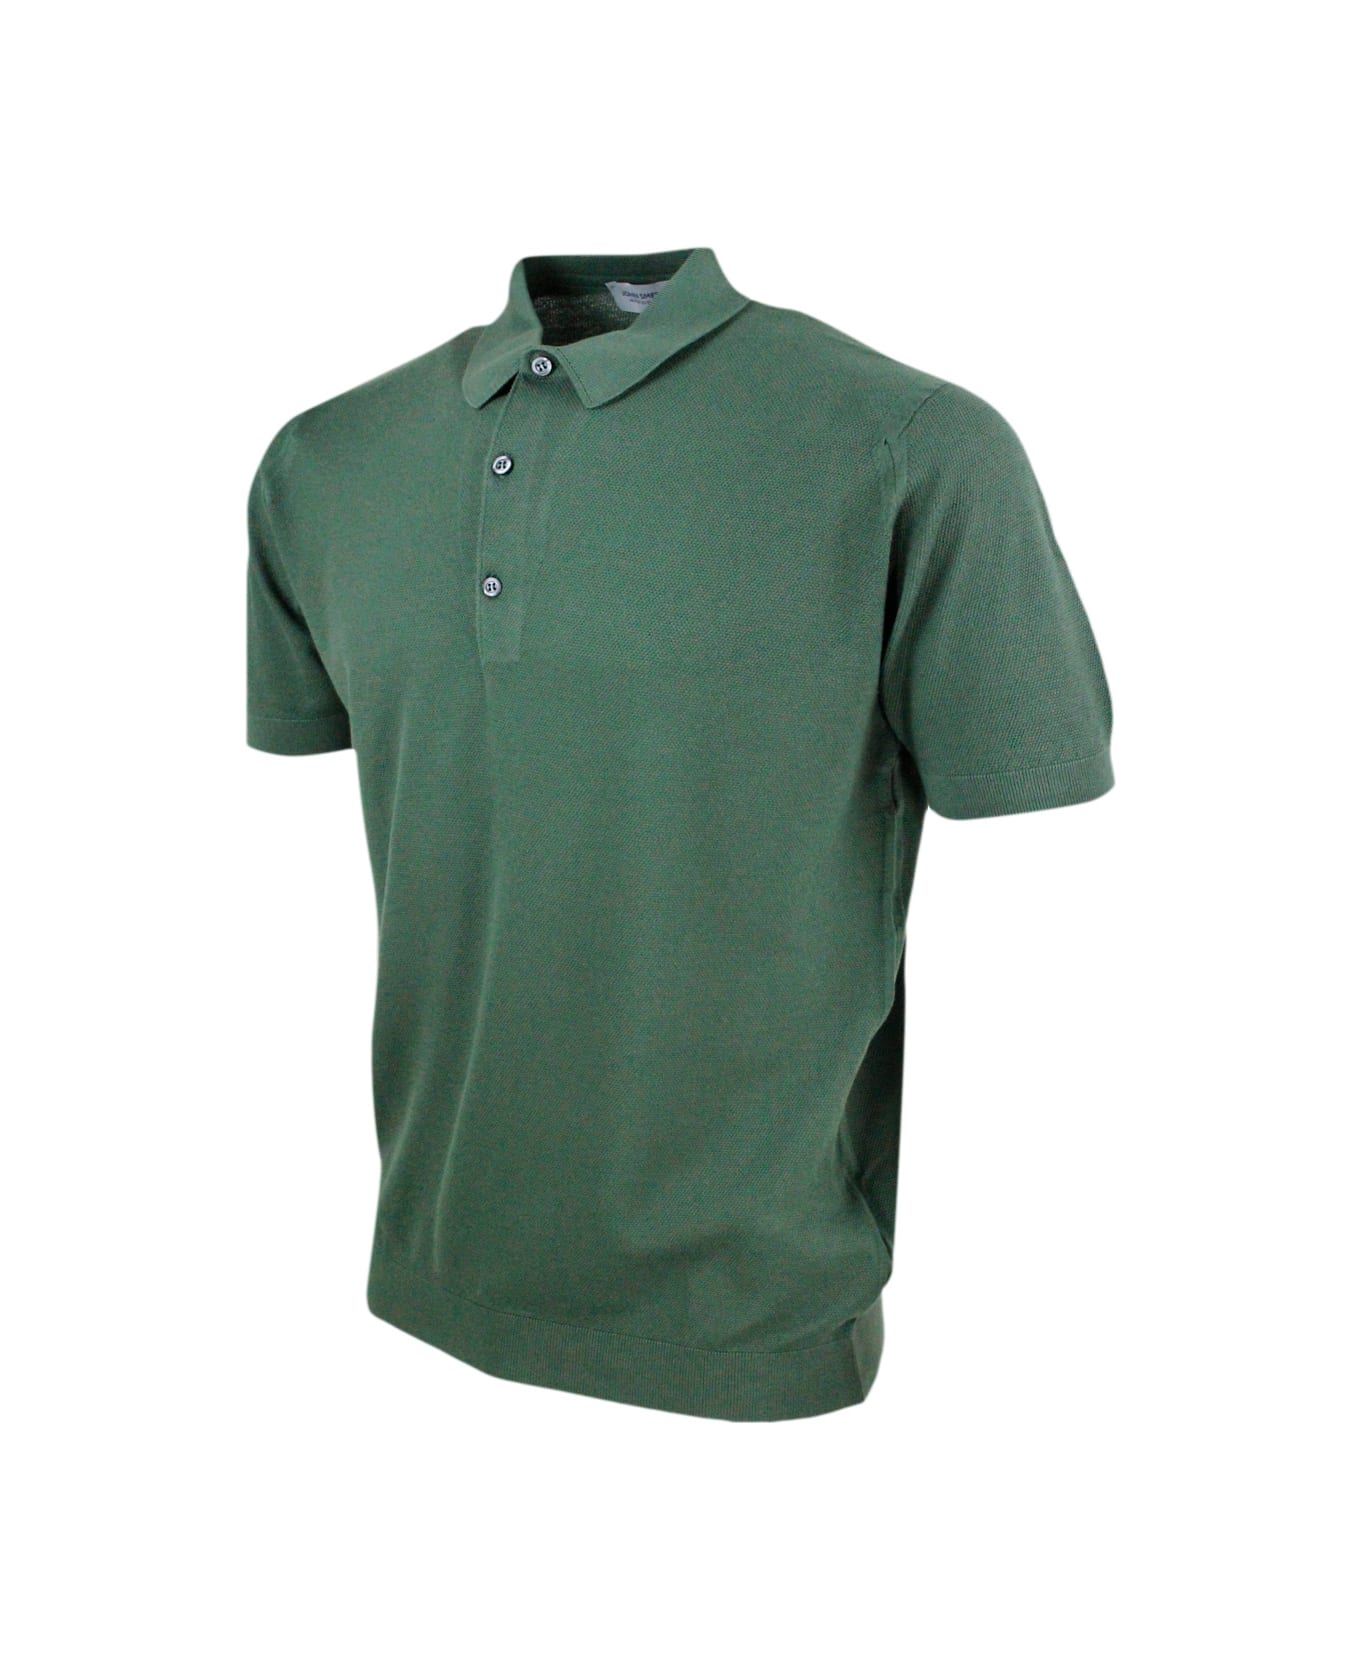 John Smedley Short-sleeved Polo Shirt In Extrafine Piqué Cotton Thread With Three Buttons - Green